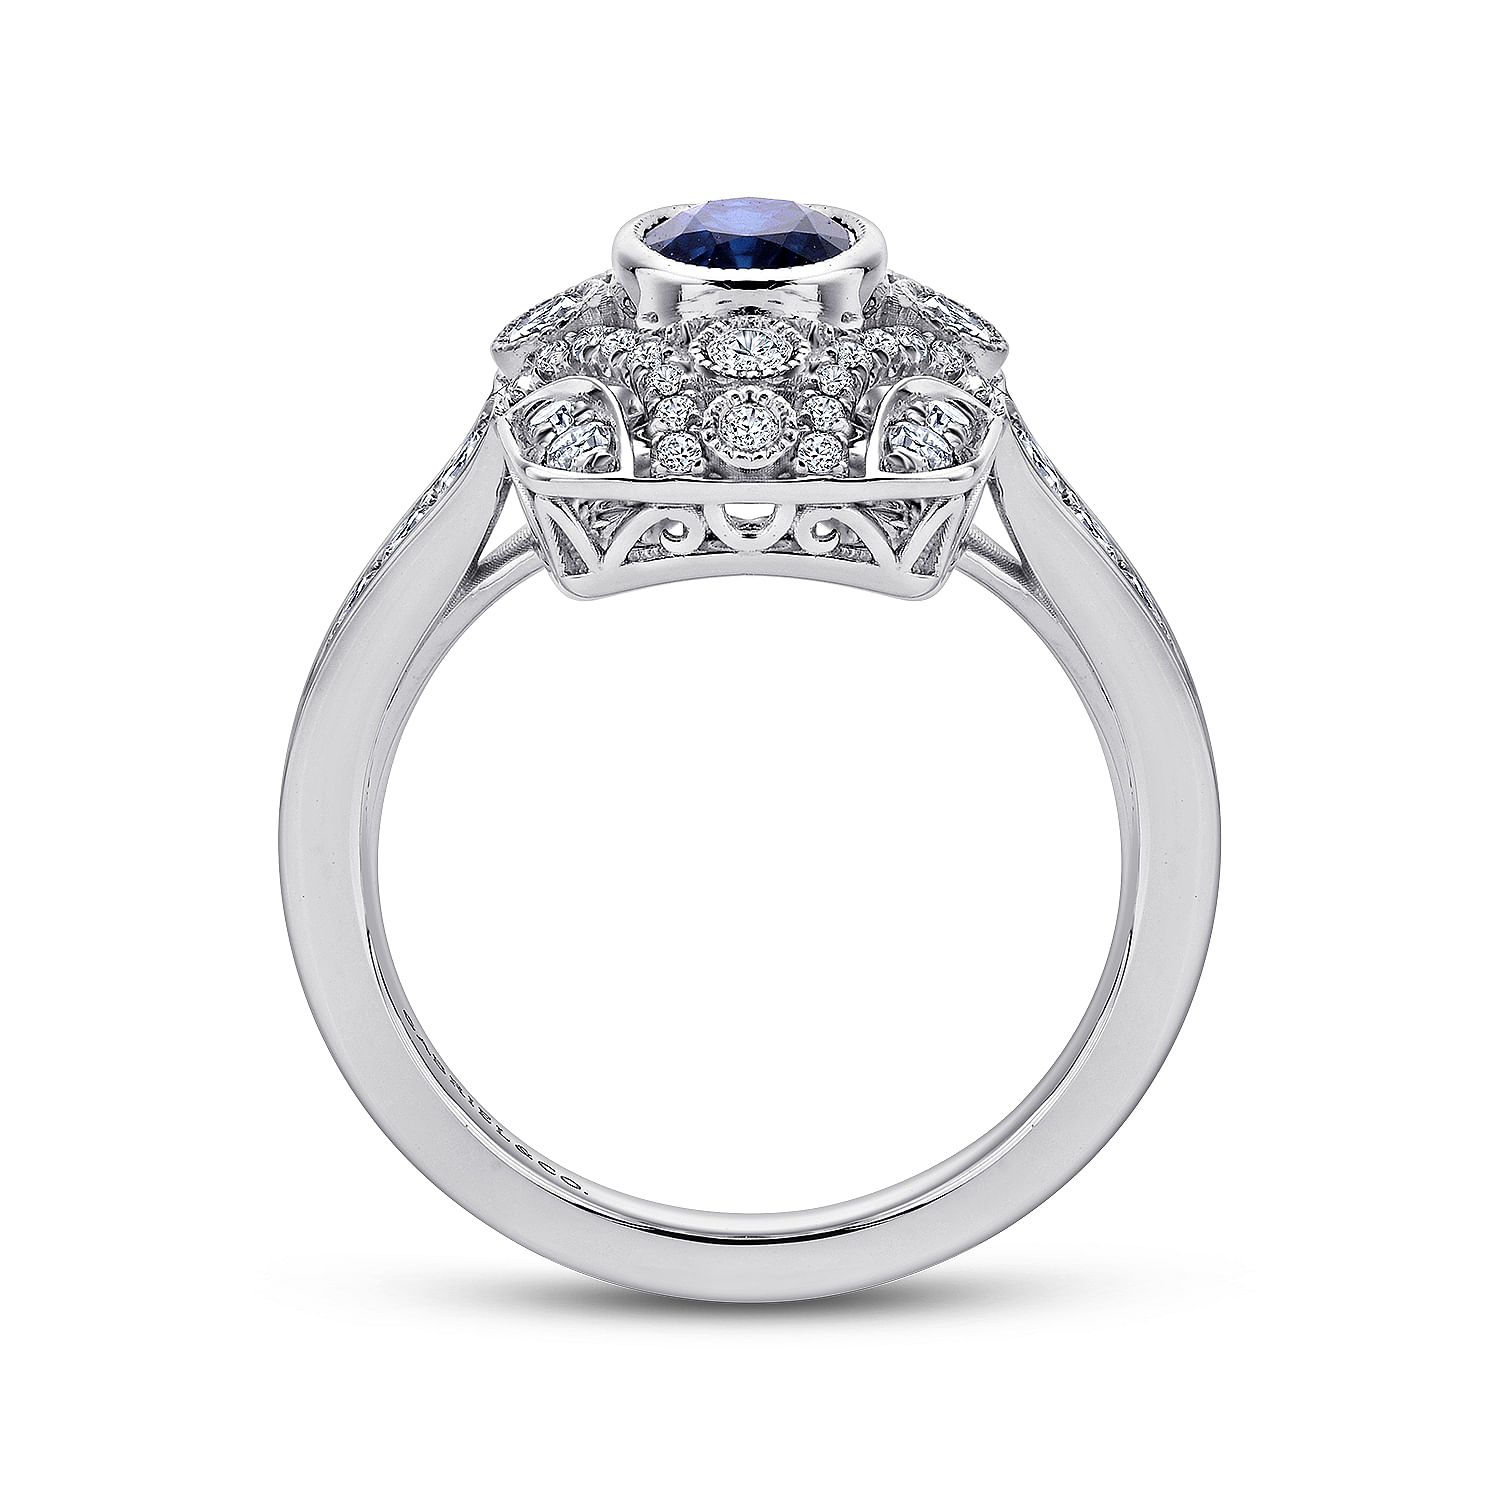 Vintage Inspired 14K White Gold Diamond Ring with Oval Sapphire Center